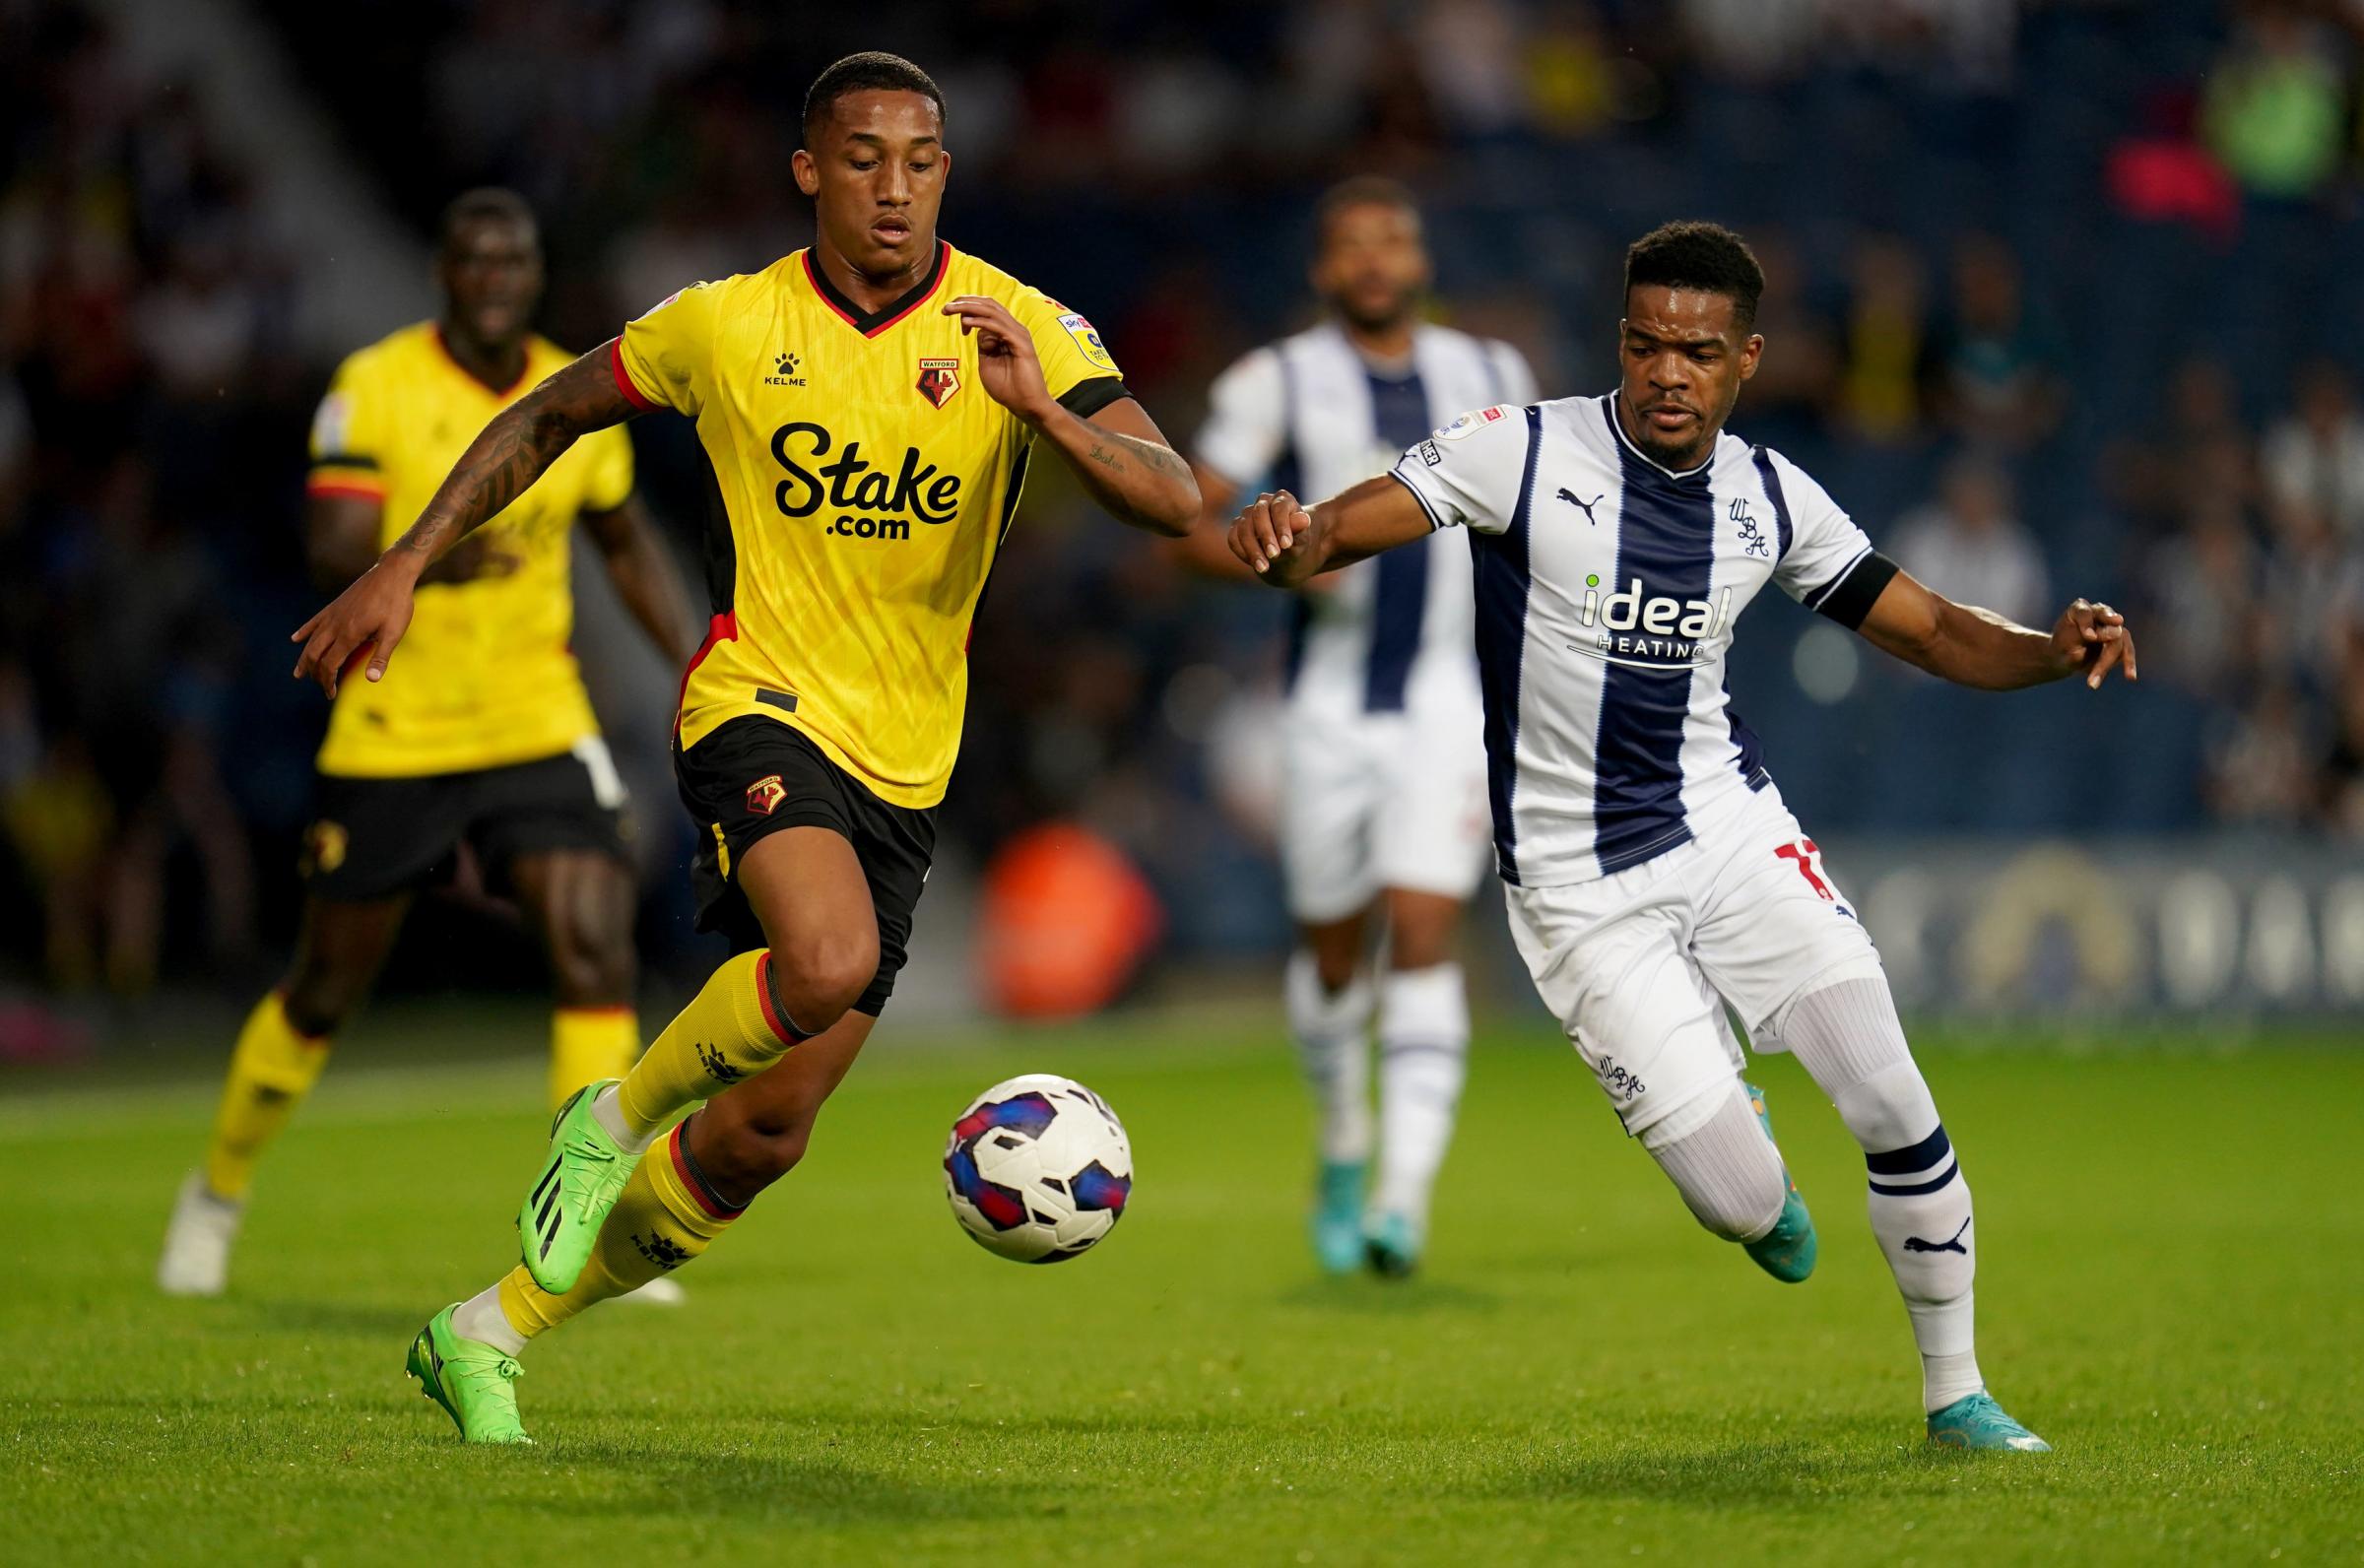 Brighon confirm they will sign Joao Pedro from Watford